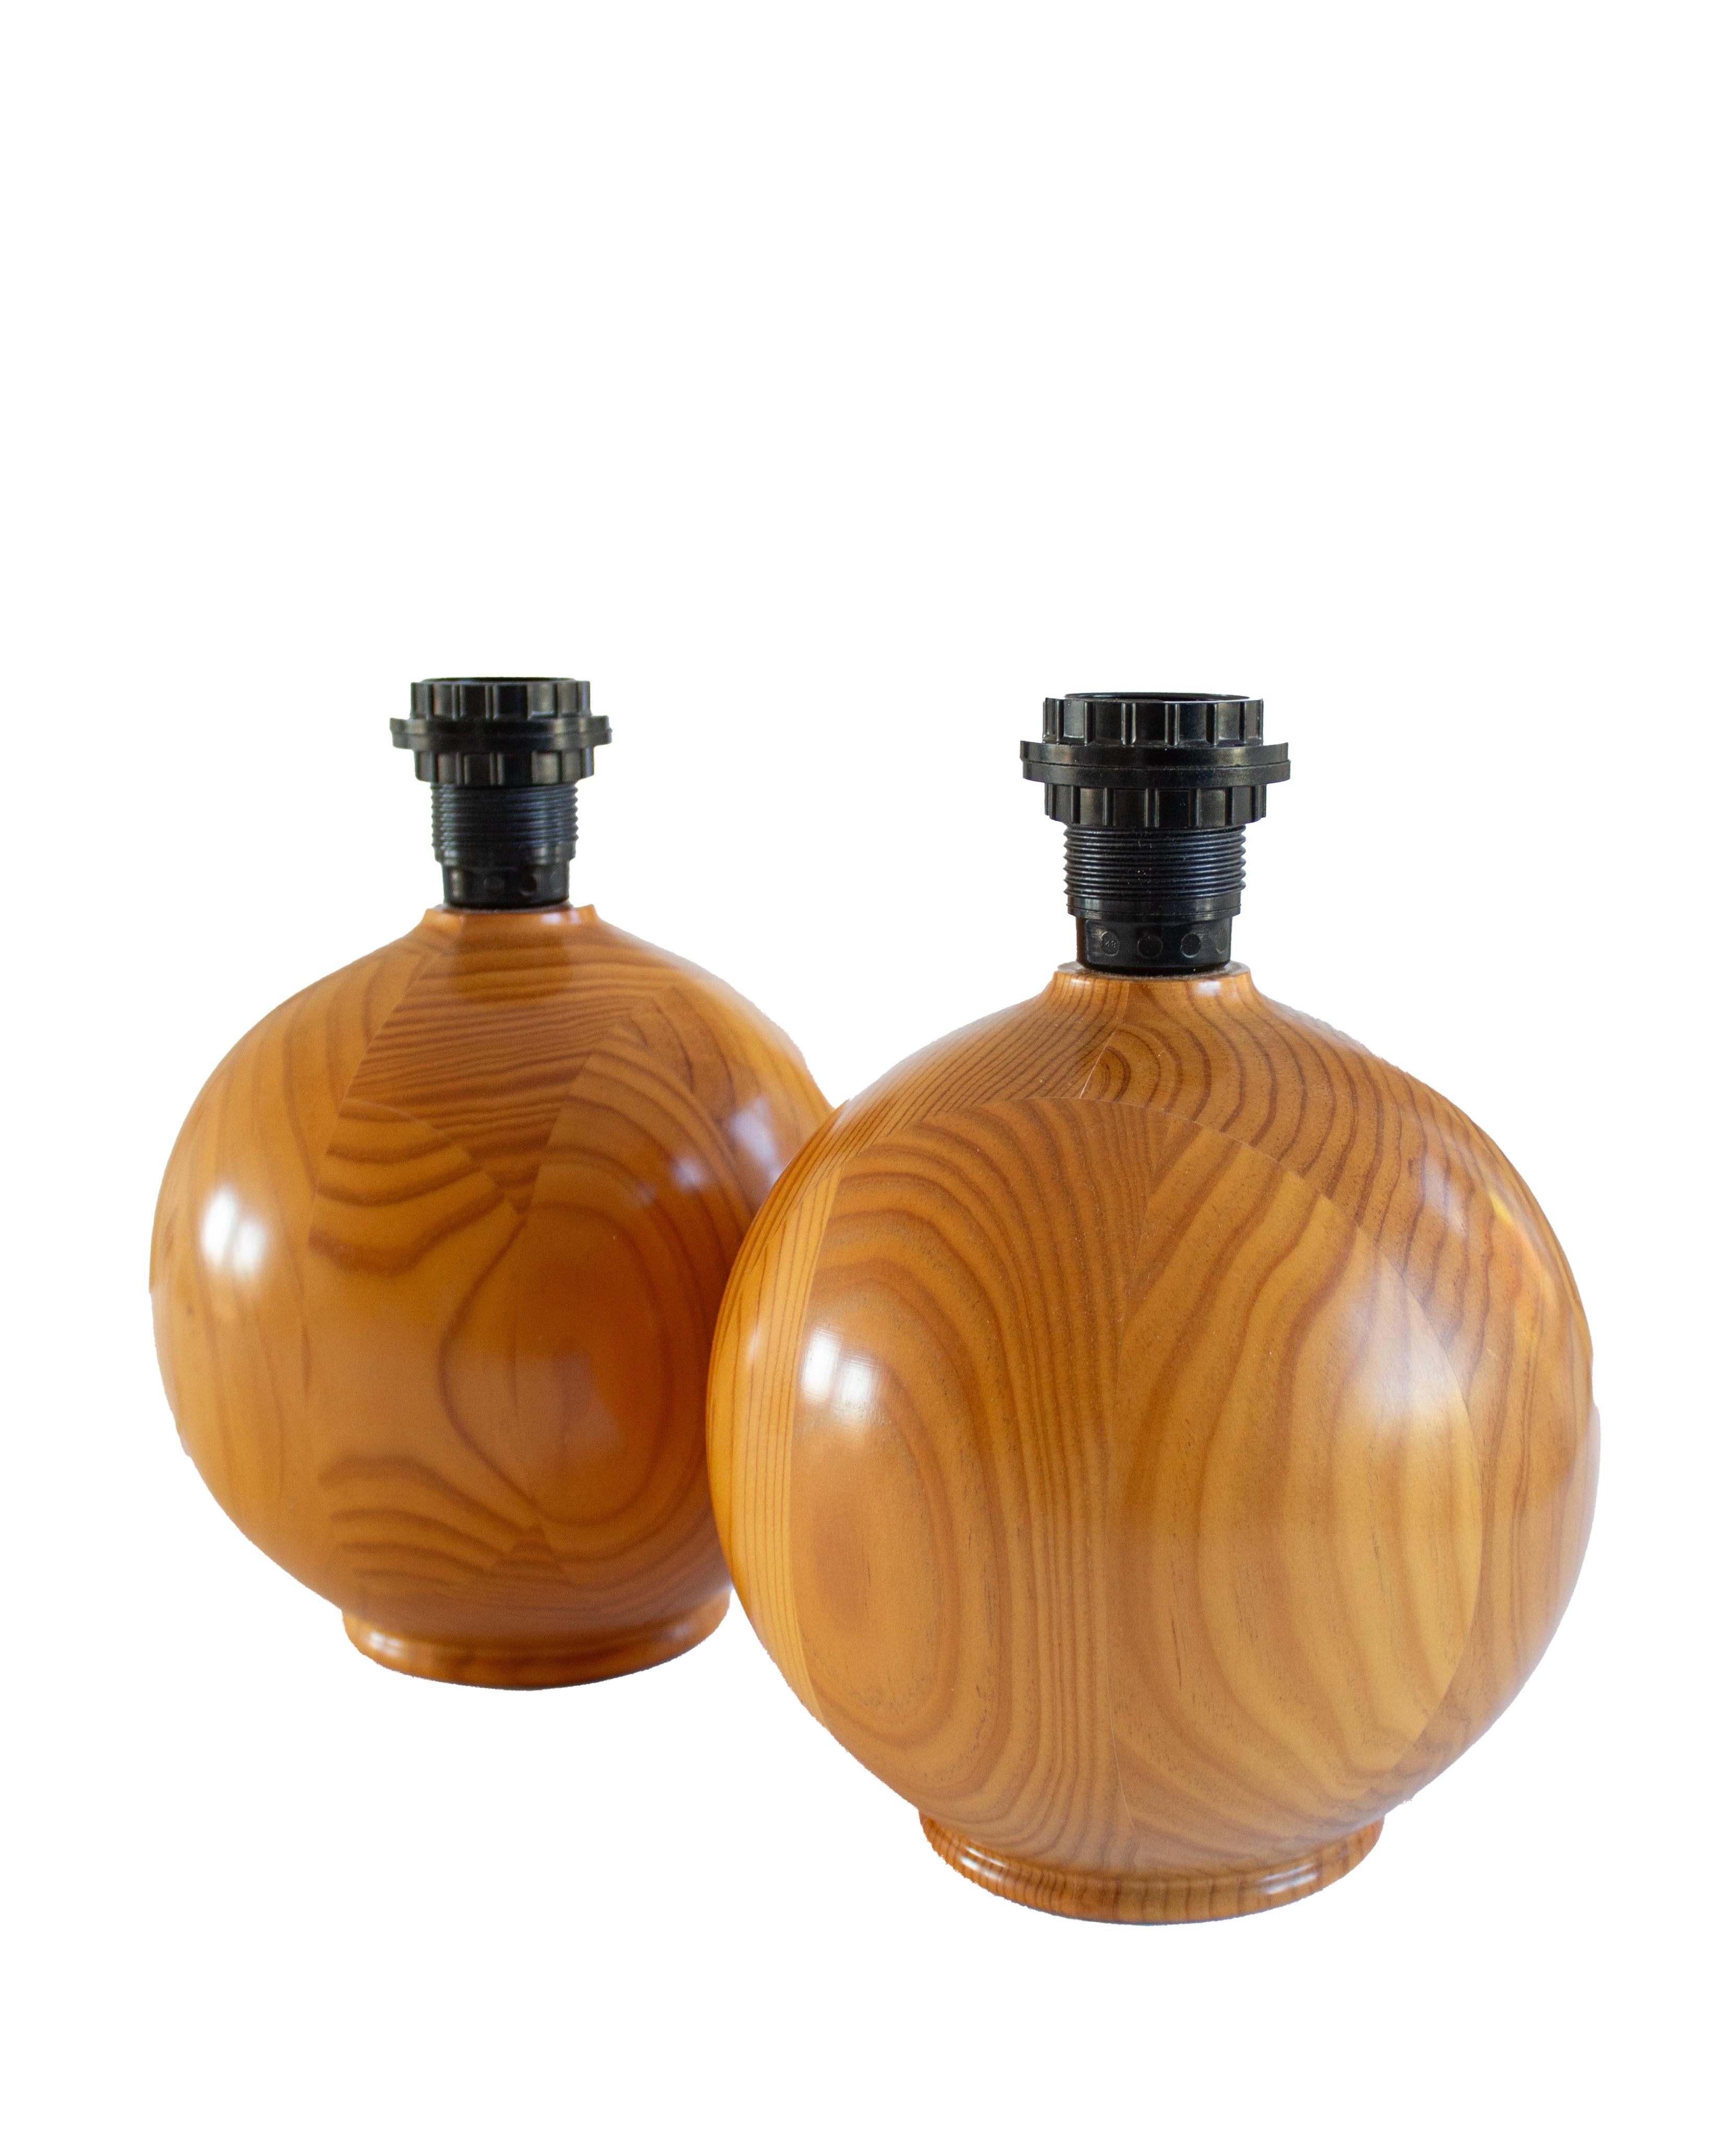 A Pair of Round Designer Table Lamps in Solid Pine from Sweden, 1970s
Sold without lampshades, dimensions for globe 21 cm. Height with socket is 28 cm. Standard E-26 medium base bulb. 
Other designers of the period include Axel Einar Hjorth and